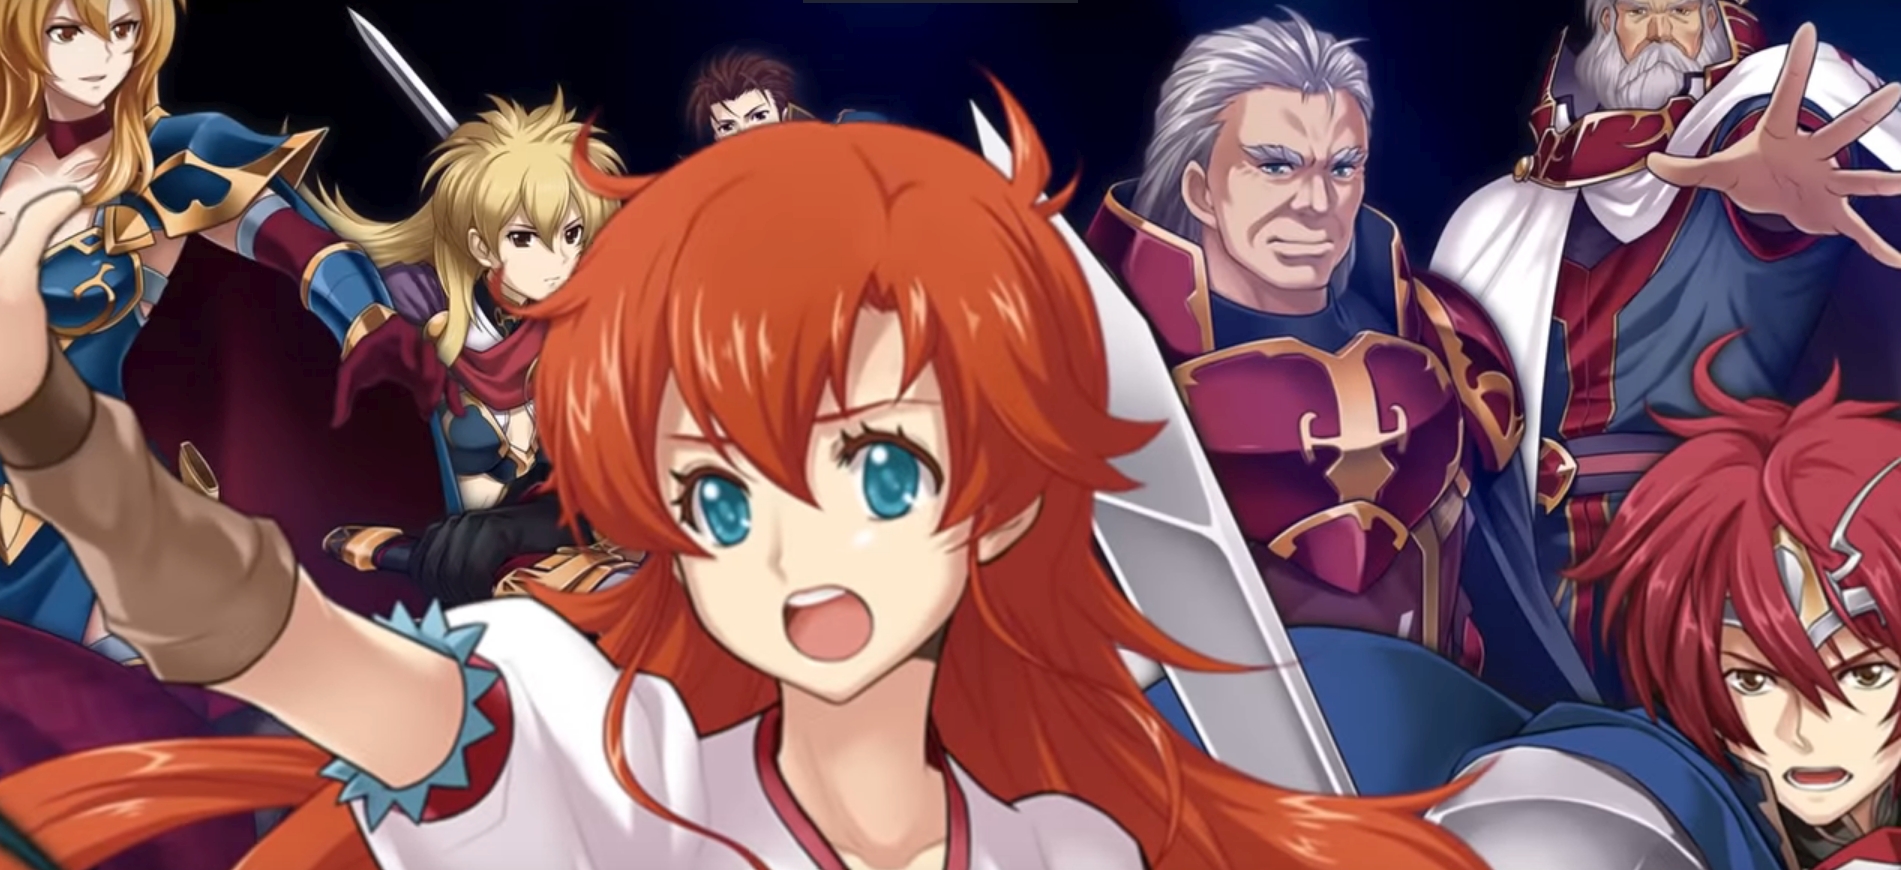 Langrisser 1 And 2 Demos Heading To Multiple Platforms In Near Future